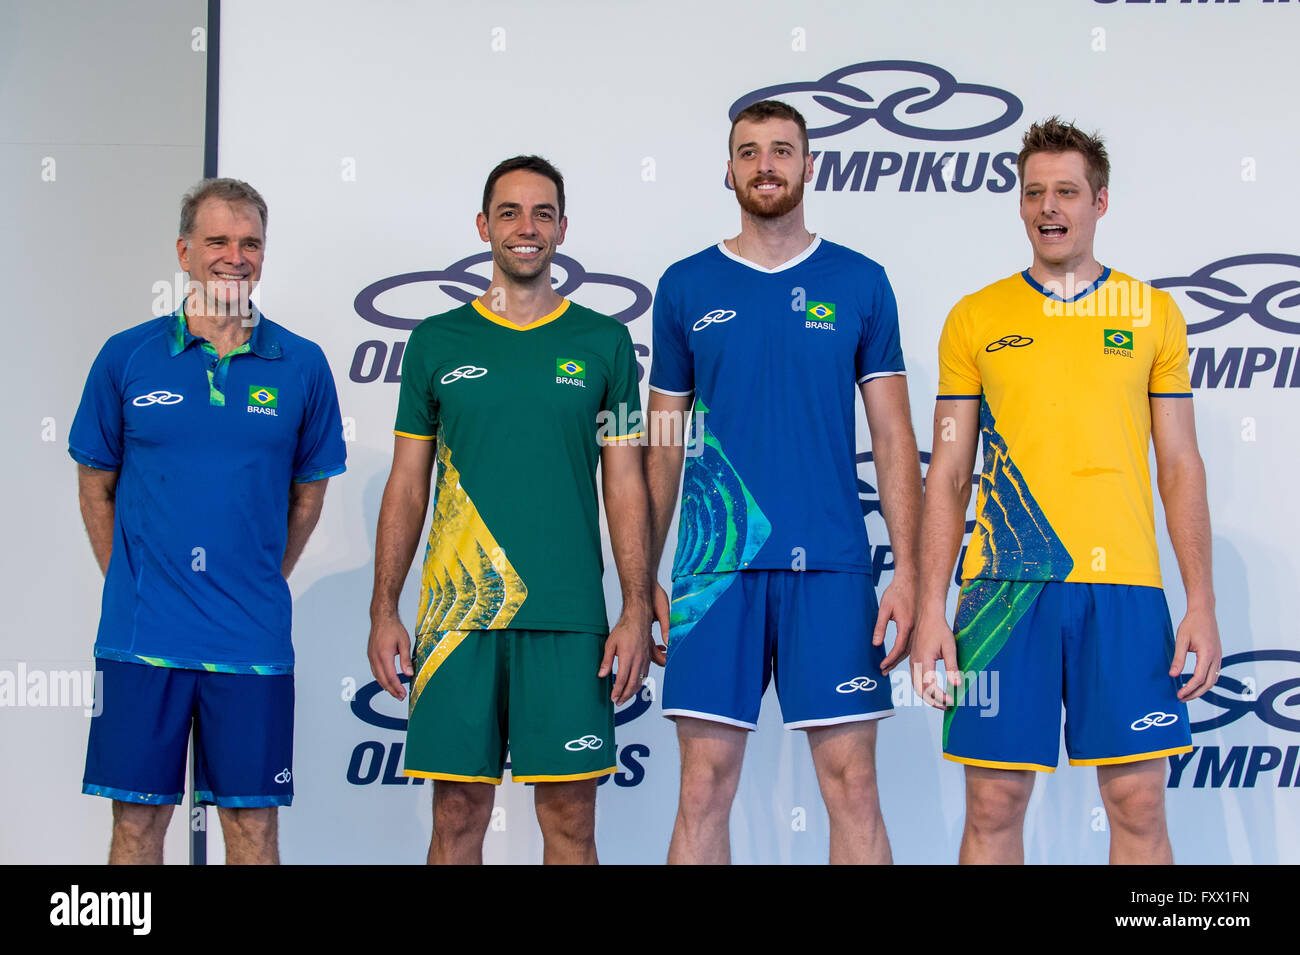 Saquerema, Brazil. 19th April, 2016. Launch UNIFORM VOLLEY - Presentation  of new uniform volleyball for the Olympic Games Rio 2016 at the training  center in Saquarema. Credit: Fotoarena/Alamy Live News Stock Photo - Alamy